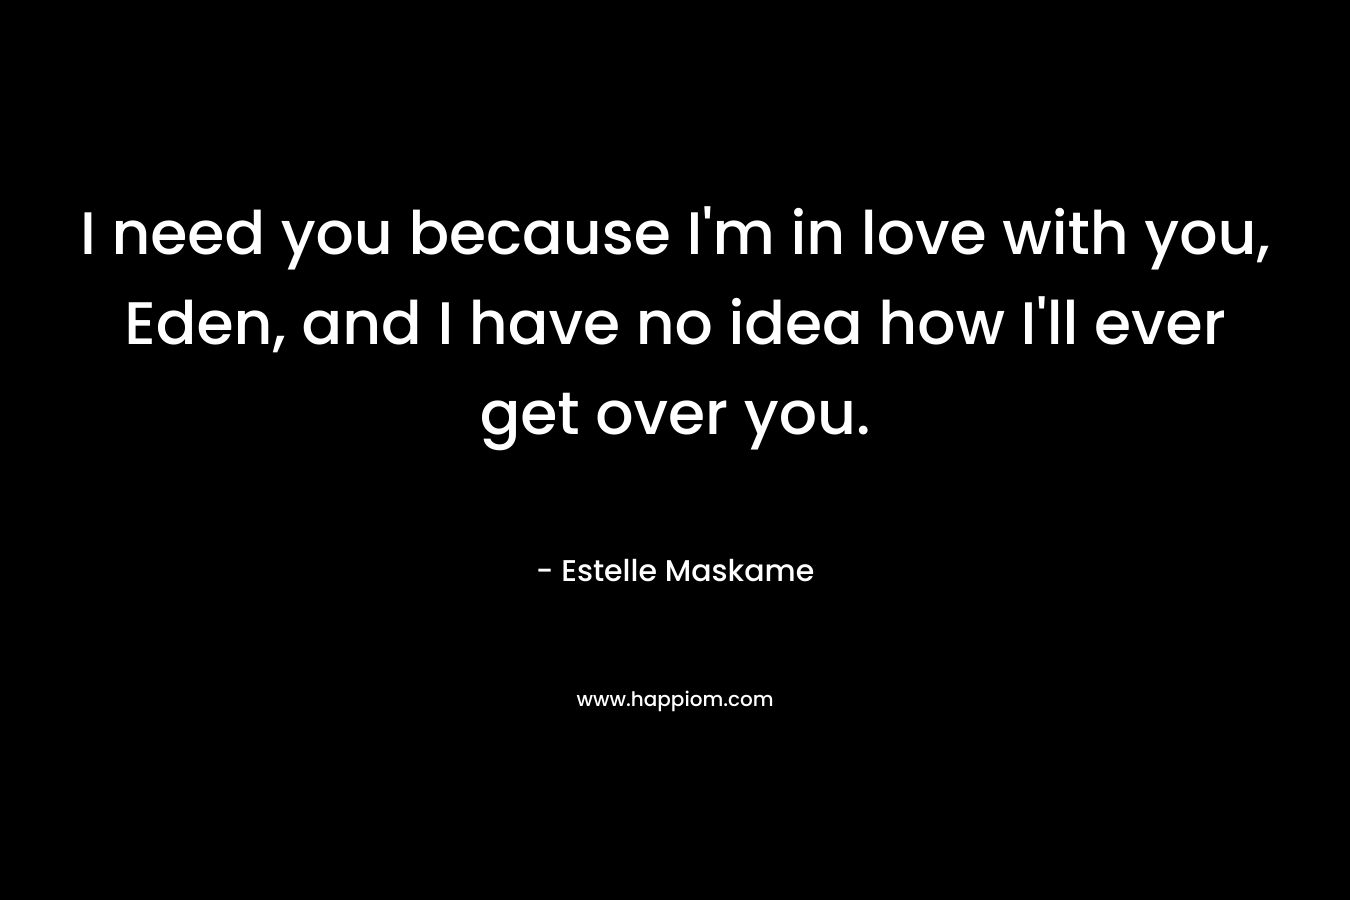 I need you because I’m in love with you, Eden, and I have no idea how I’ll ever get over you. – Estelle Maskame